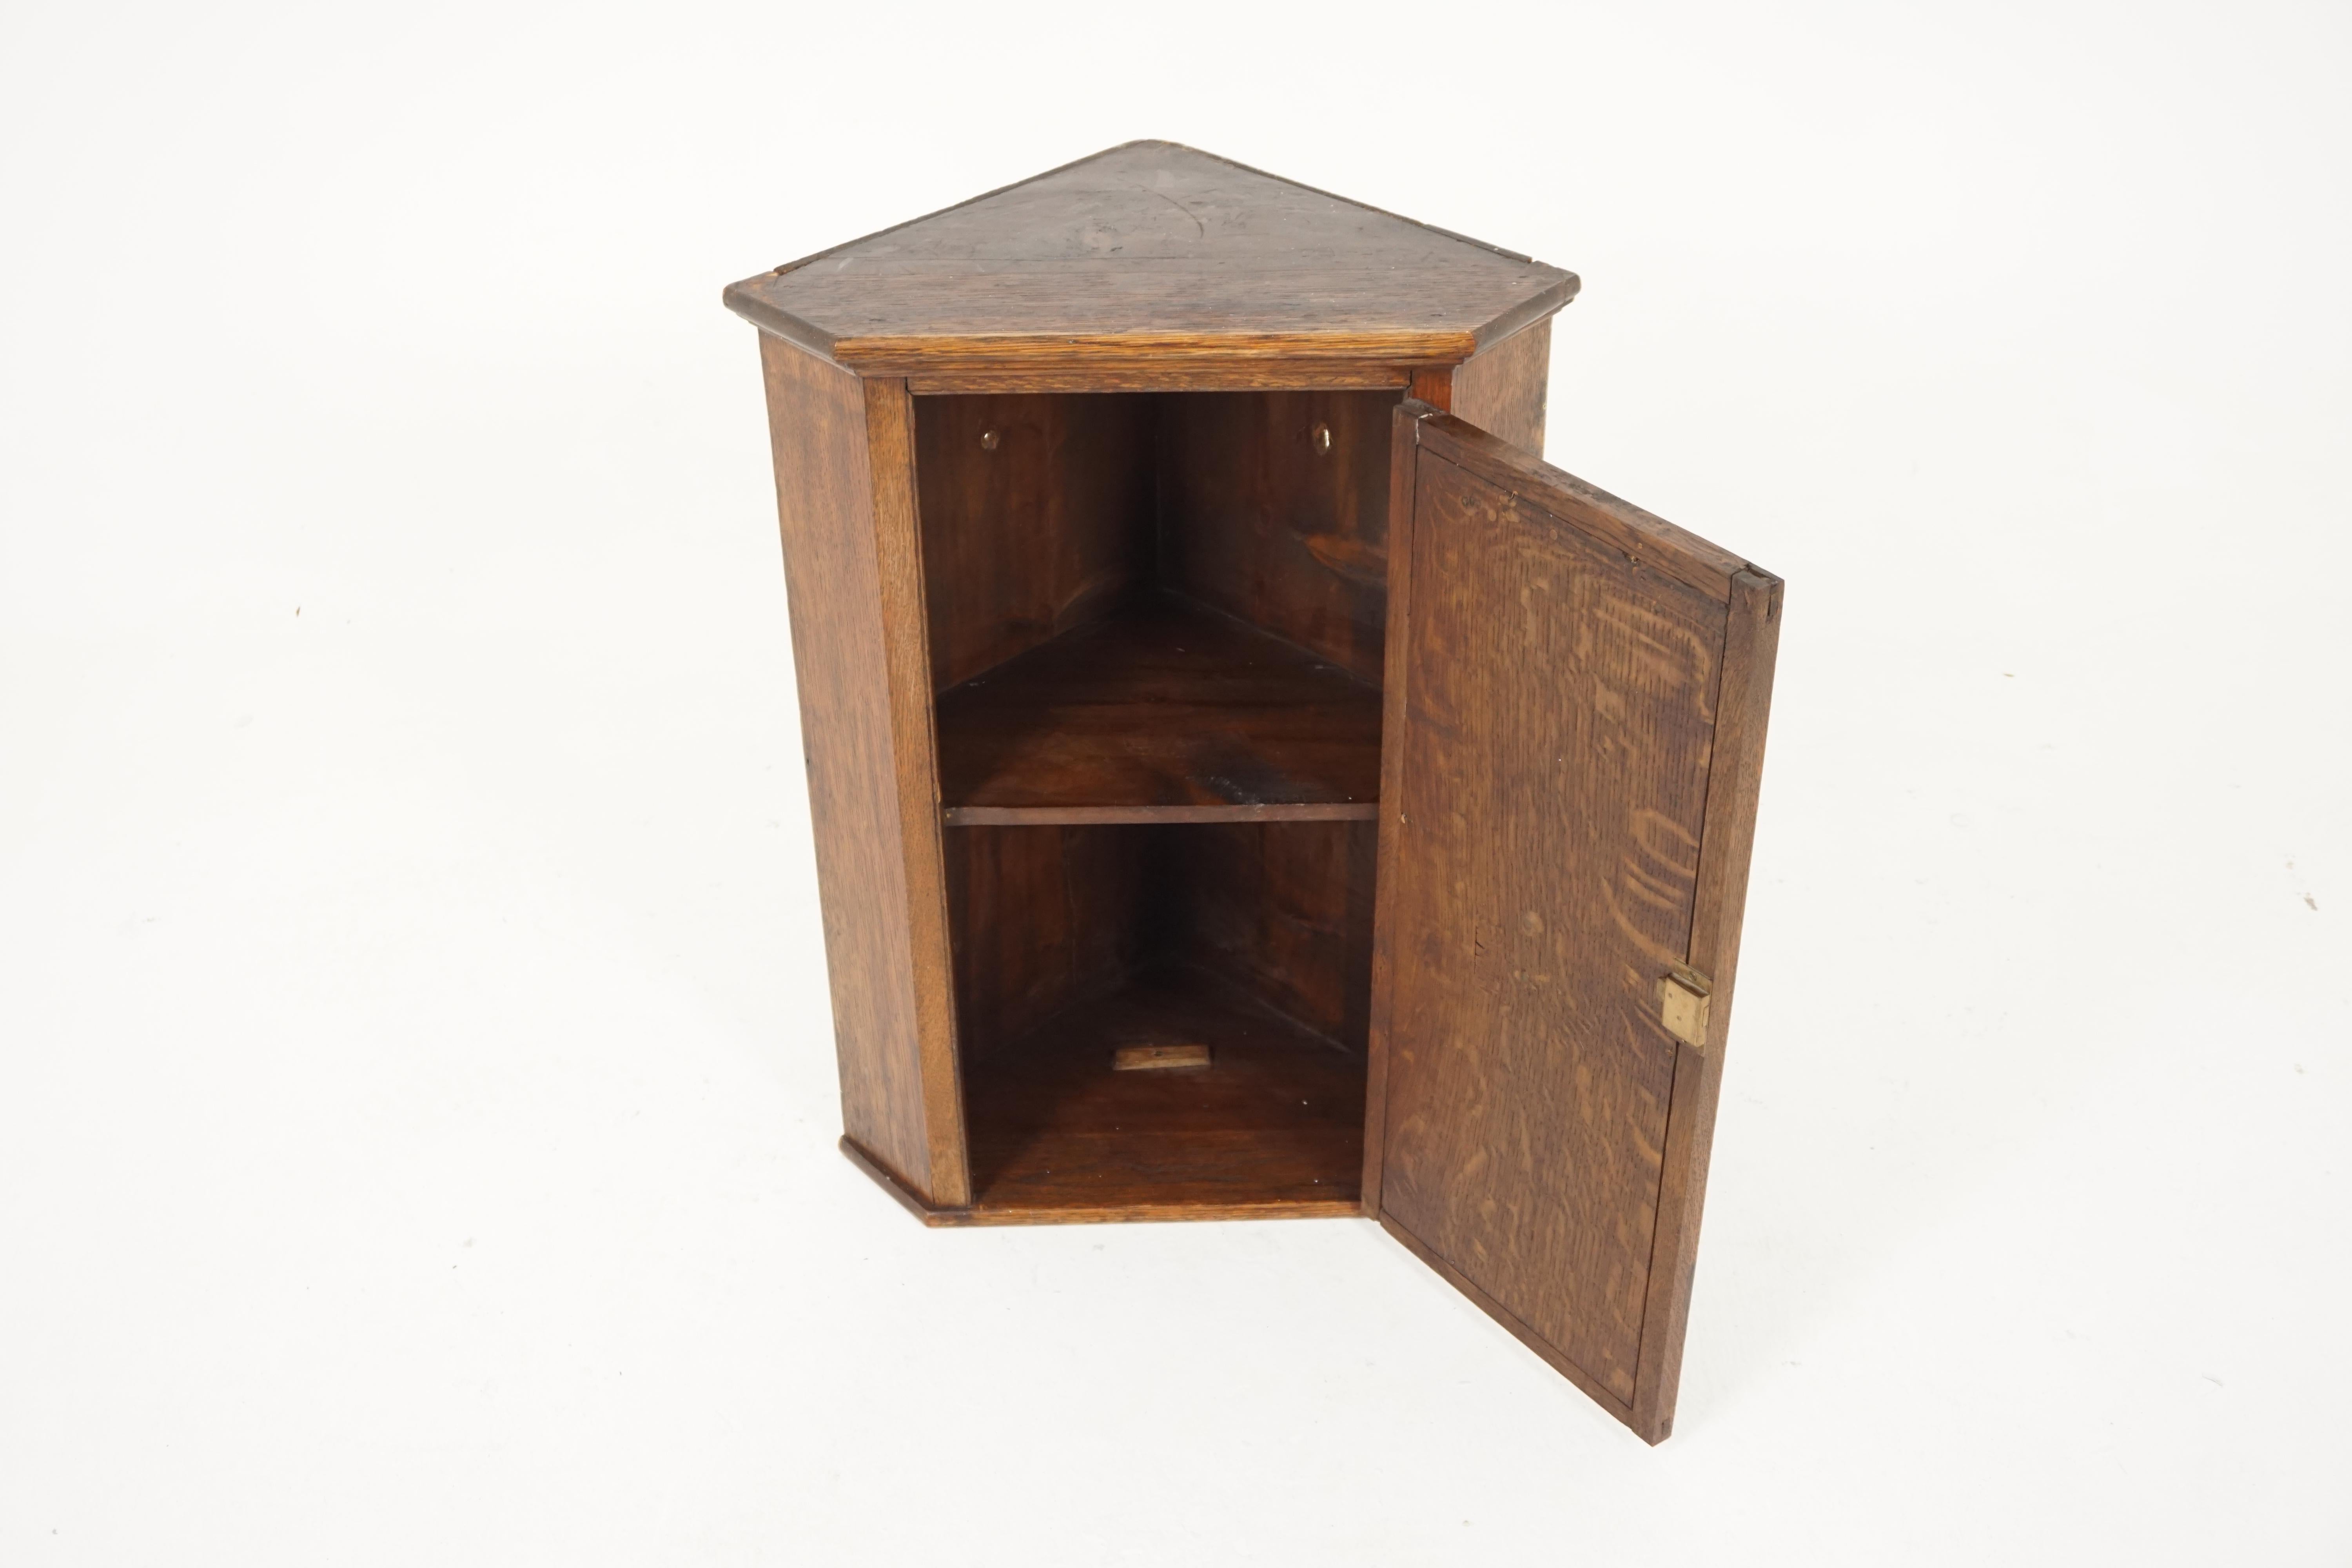 Antique Corner cabinet, Victorian Gothic carved Tiger oak hanging cabinet, Antique Furniture, Scotland 1890, B2014

Scotland 1890
Solid Oak
Original Finish
Solid Oak top
Moulded cornice below
Single heavily carved door to the front
Canted